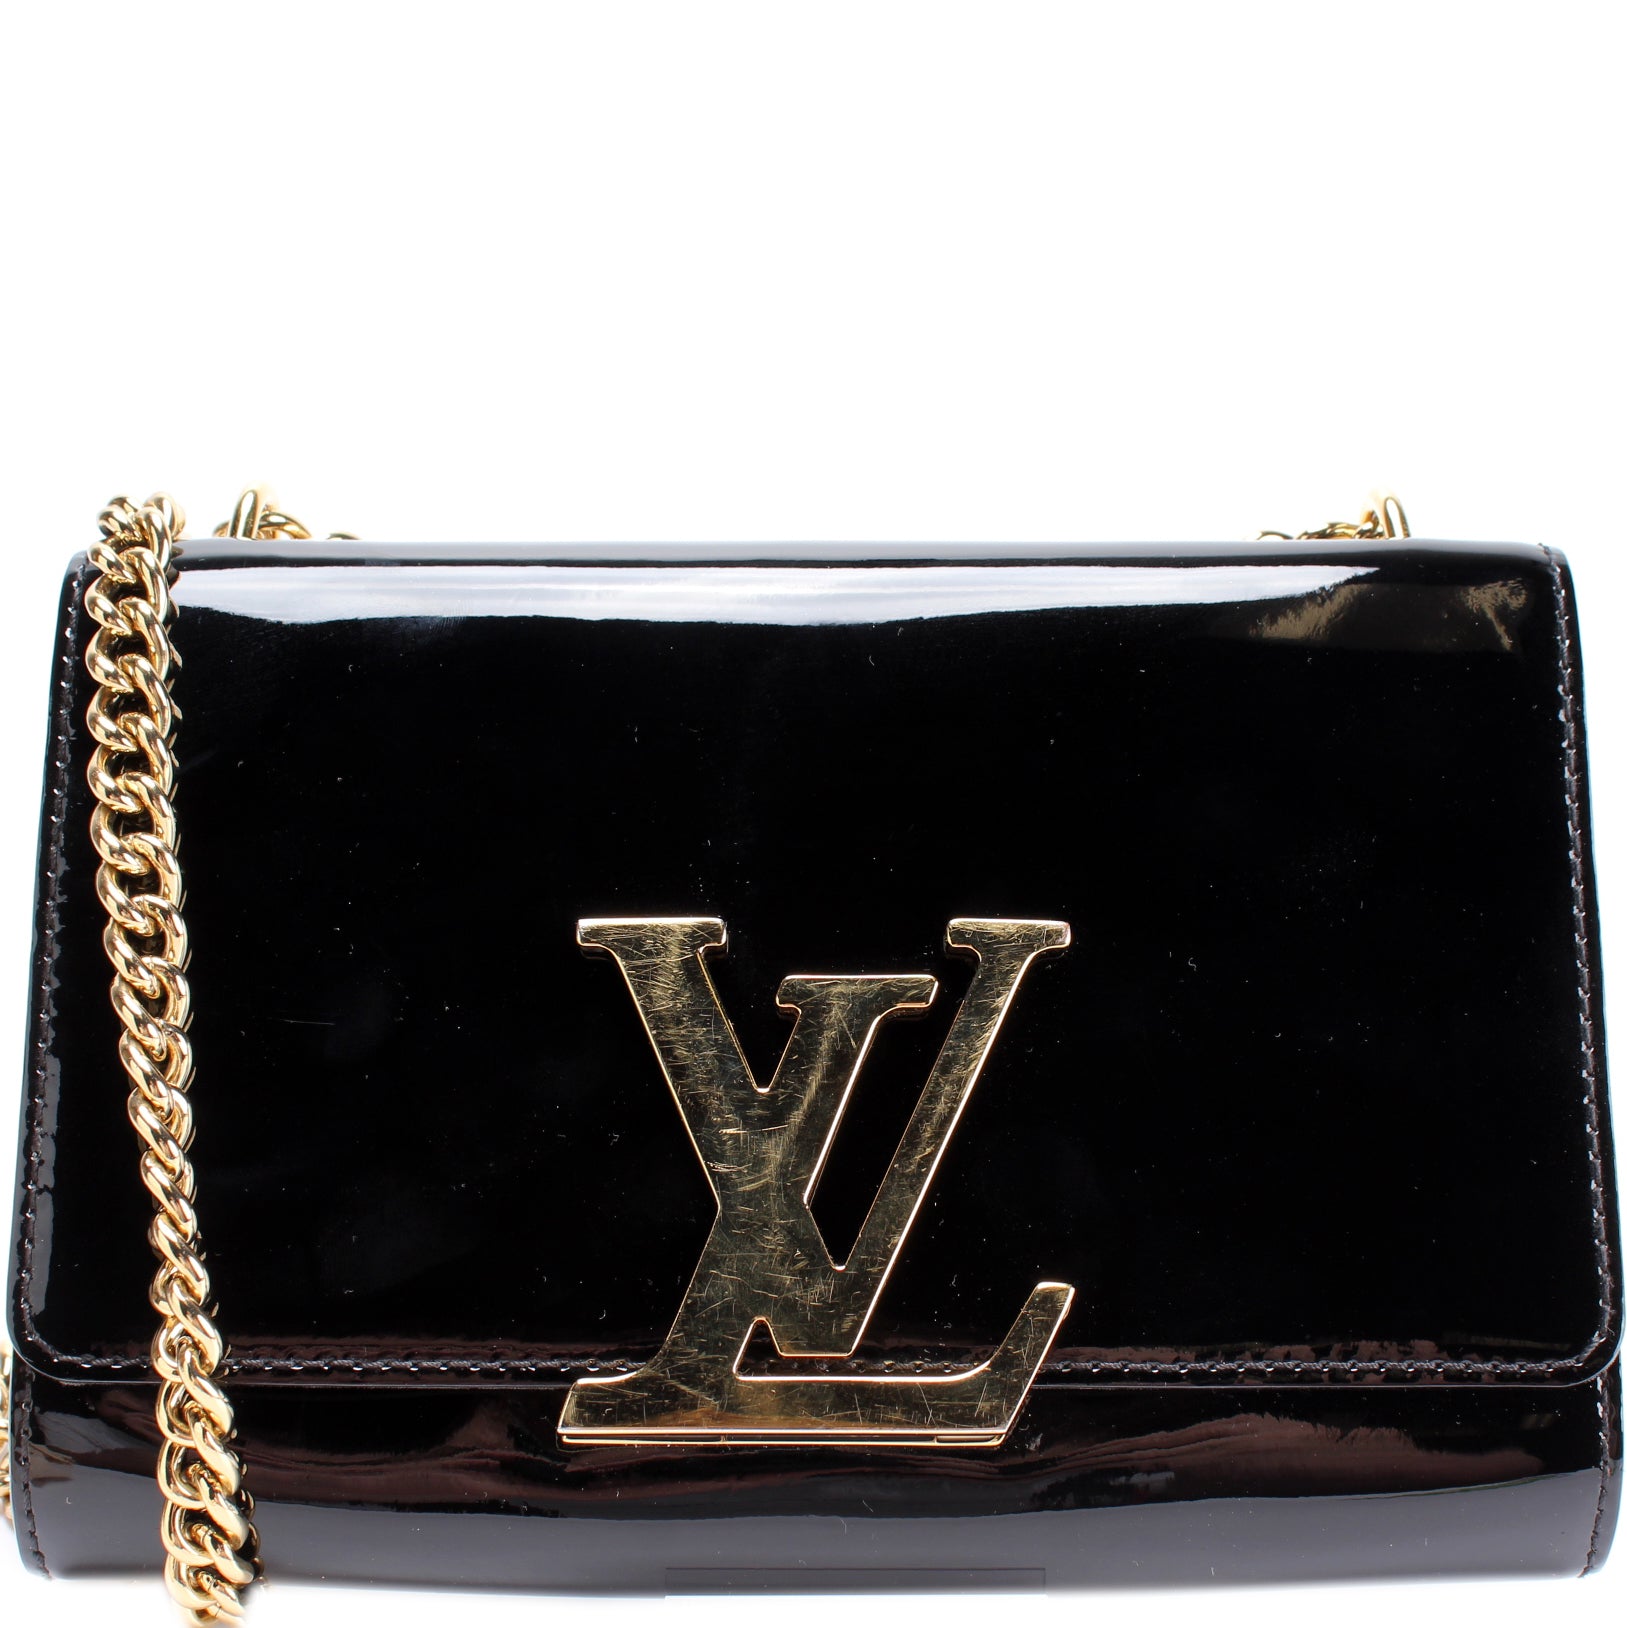 Louis Vuitton Chain Louise PM Black in Patent Leather with Gold